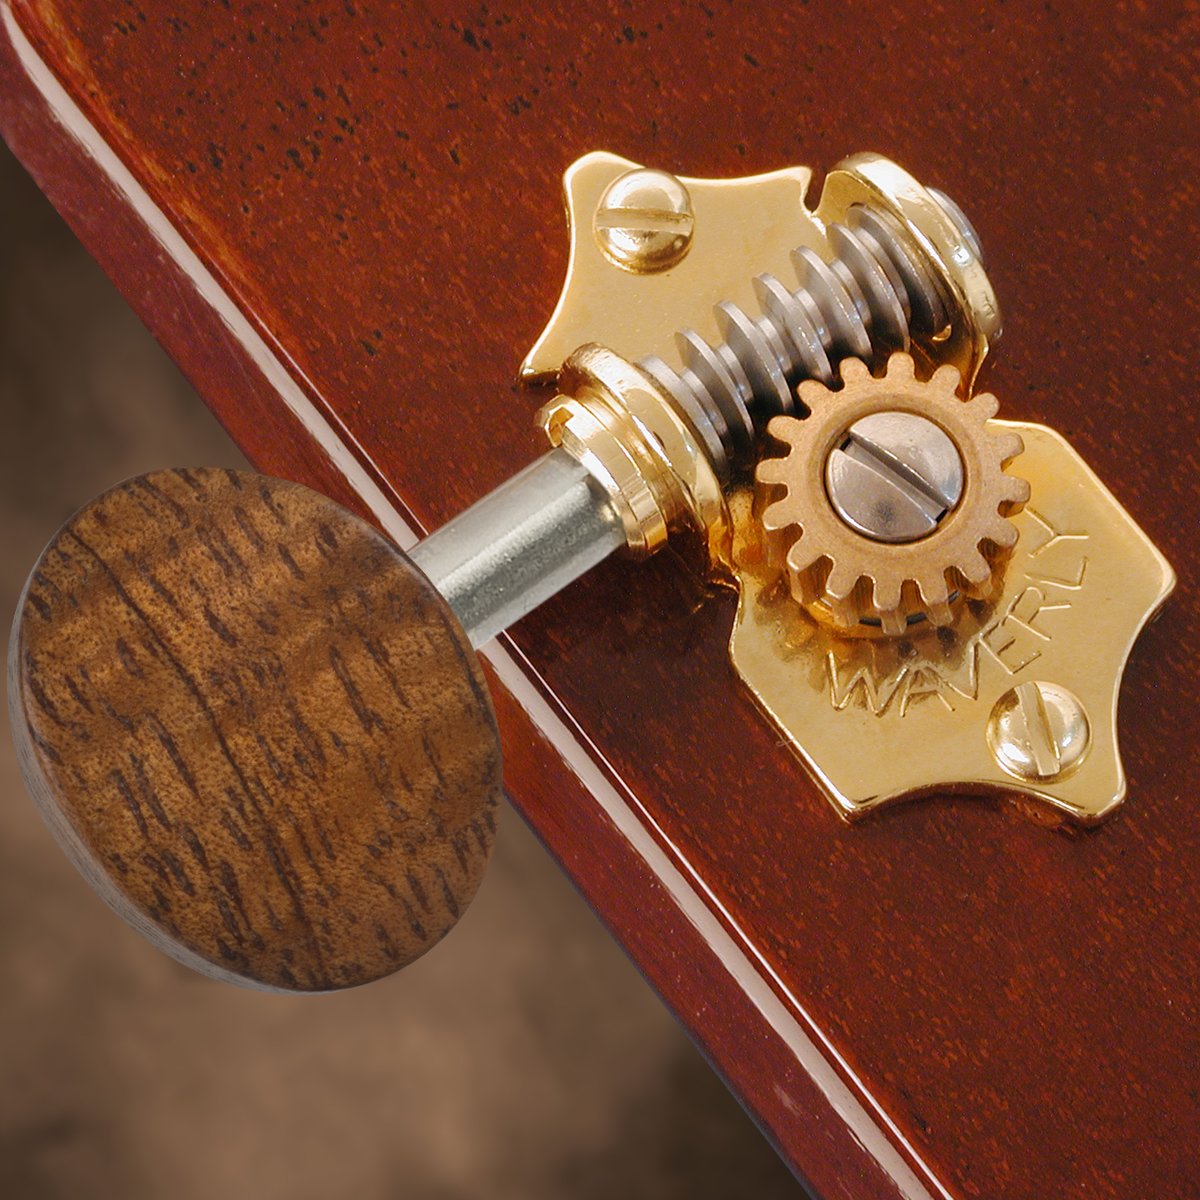 Waverly Guitar Tuners with Koa Knobs for Solid Pegheads